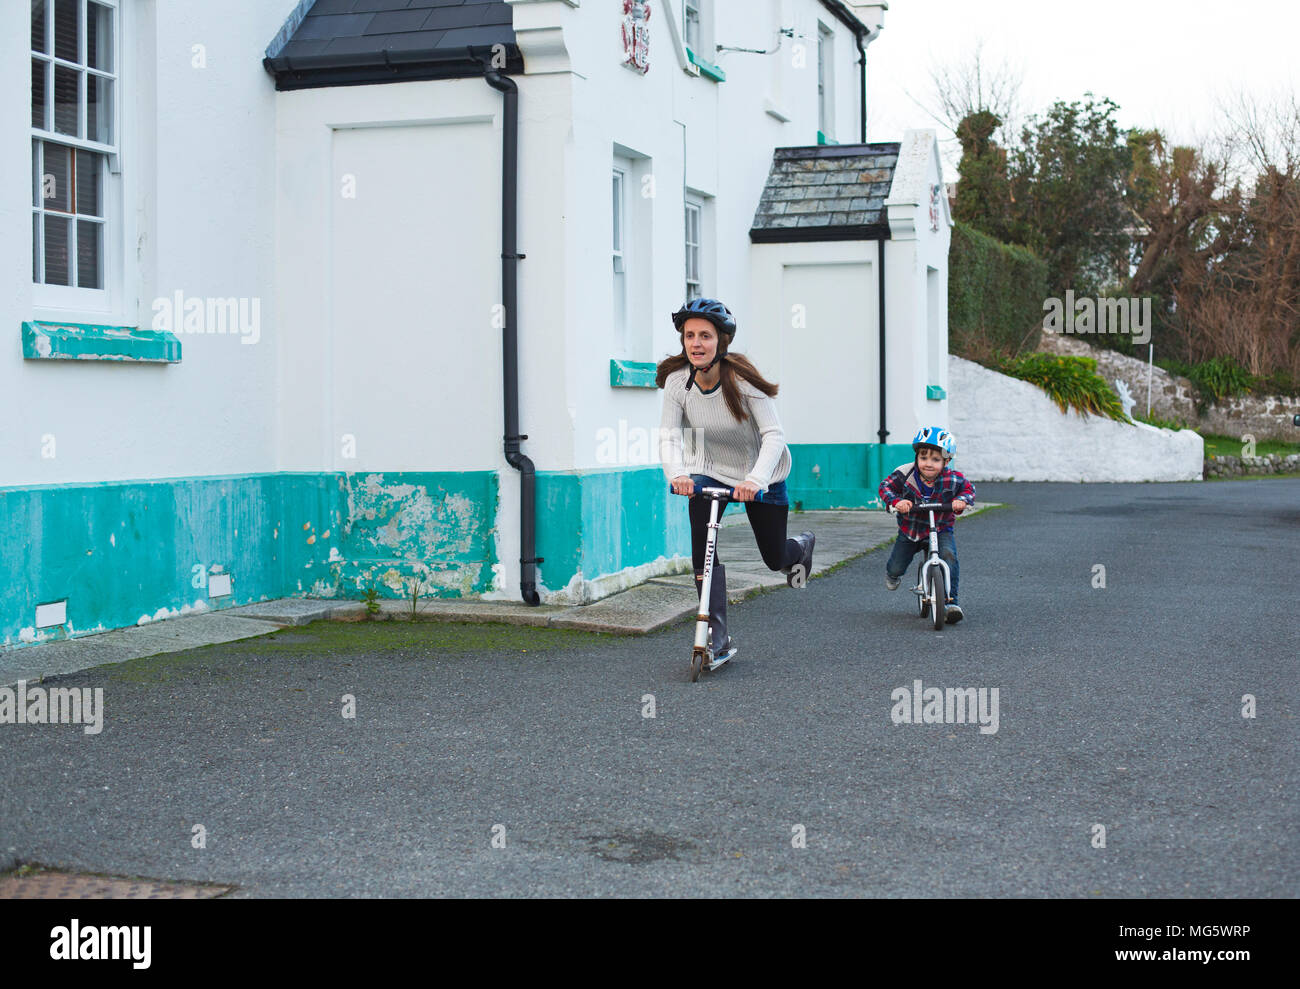 A mother racing with her son on his bike Stock Photo